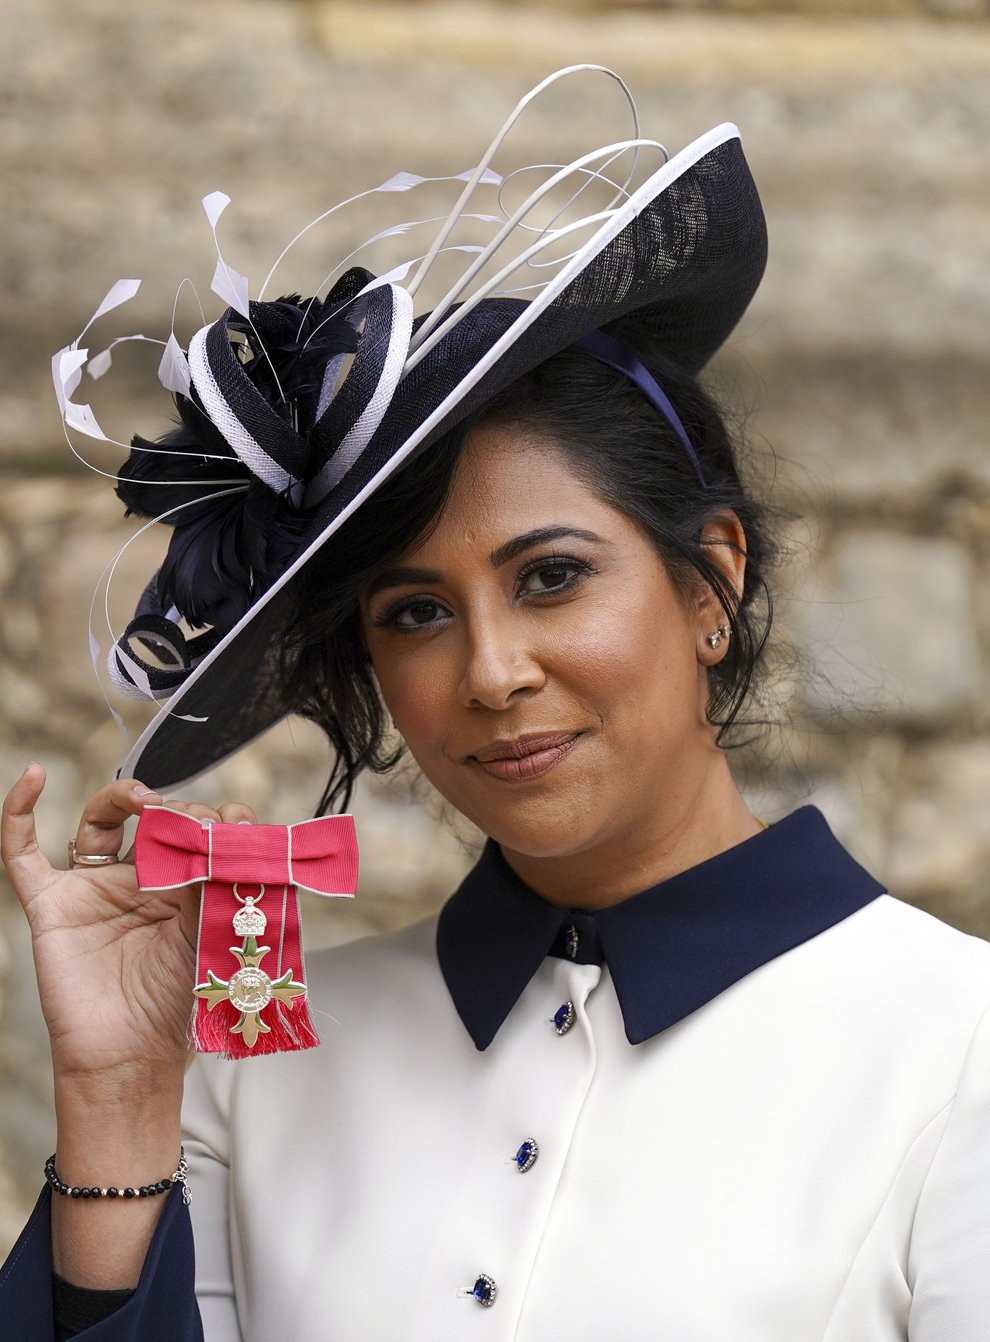 Meera Naran after she was made a MBE (Member of the Order of the British Empire) by the Princess Royal at Windsor Castle following an investiture ceremony at Windsor Castle (Steve Parsons/PA)